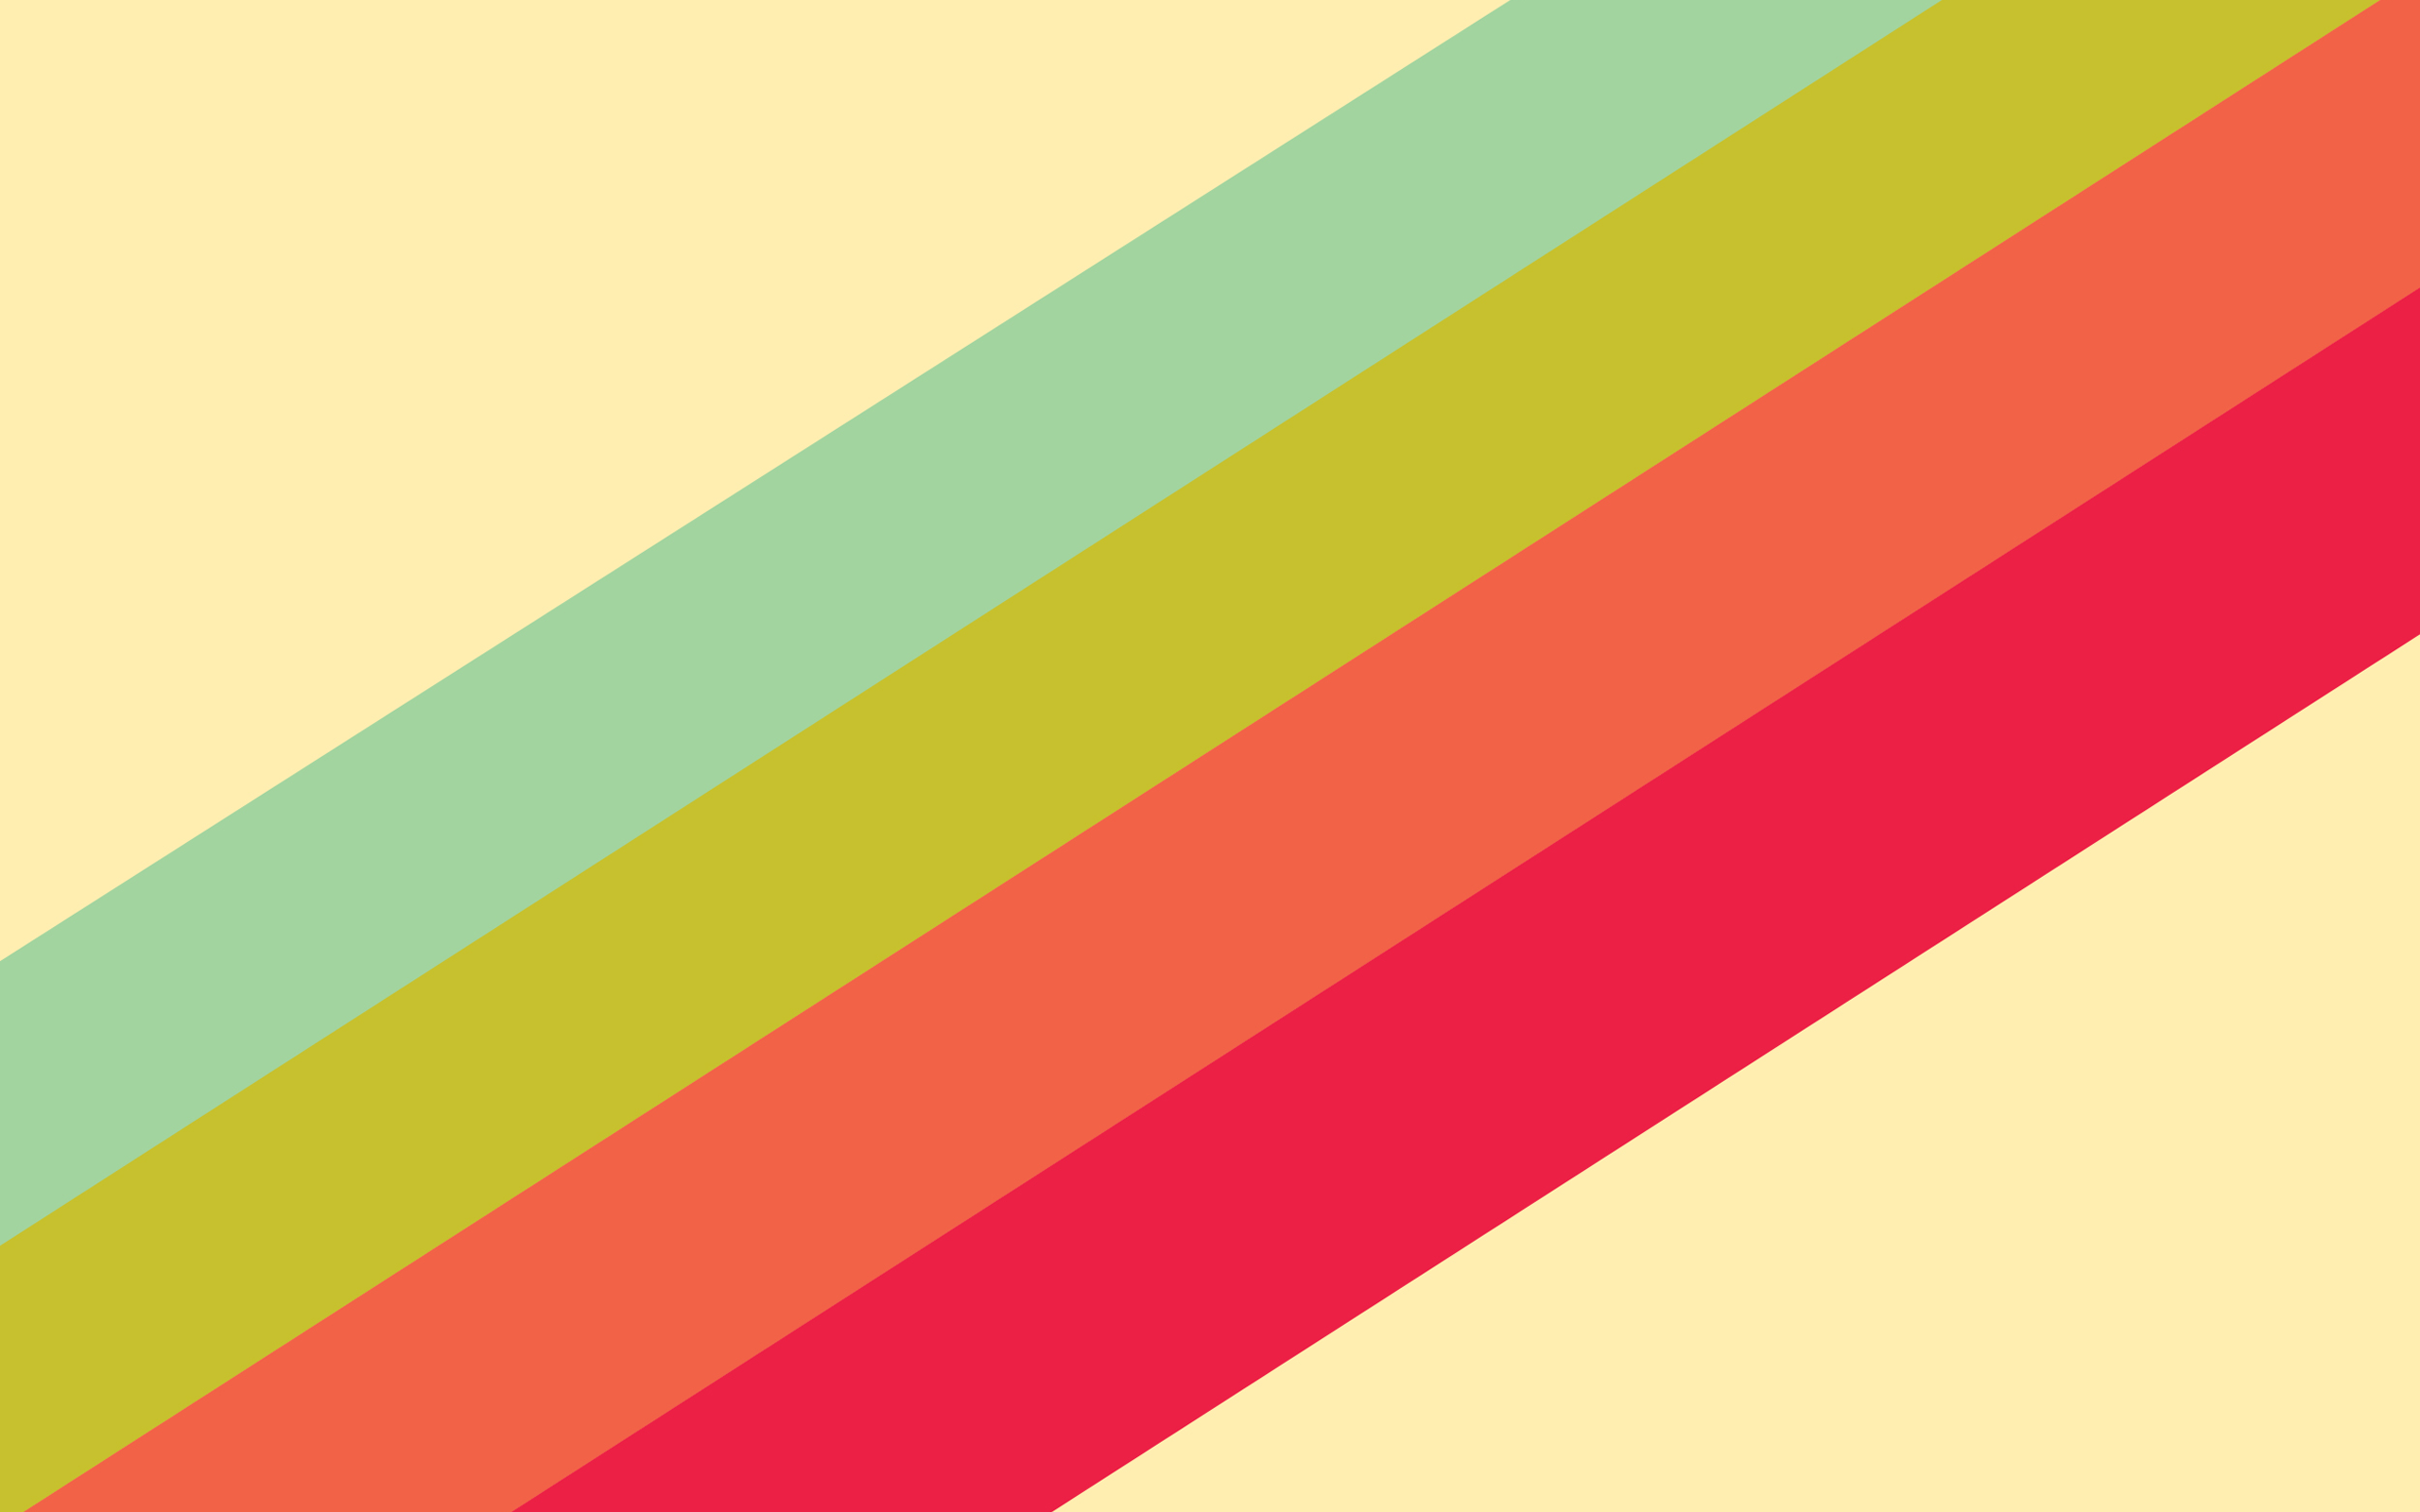 colorful, #minimalism, #lines, #abstract, wallpaper. Minimalist